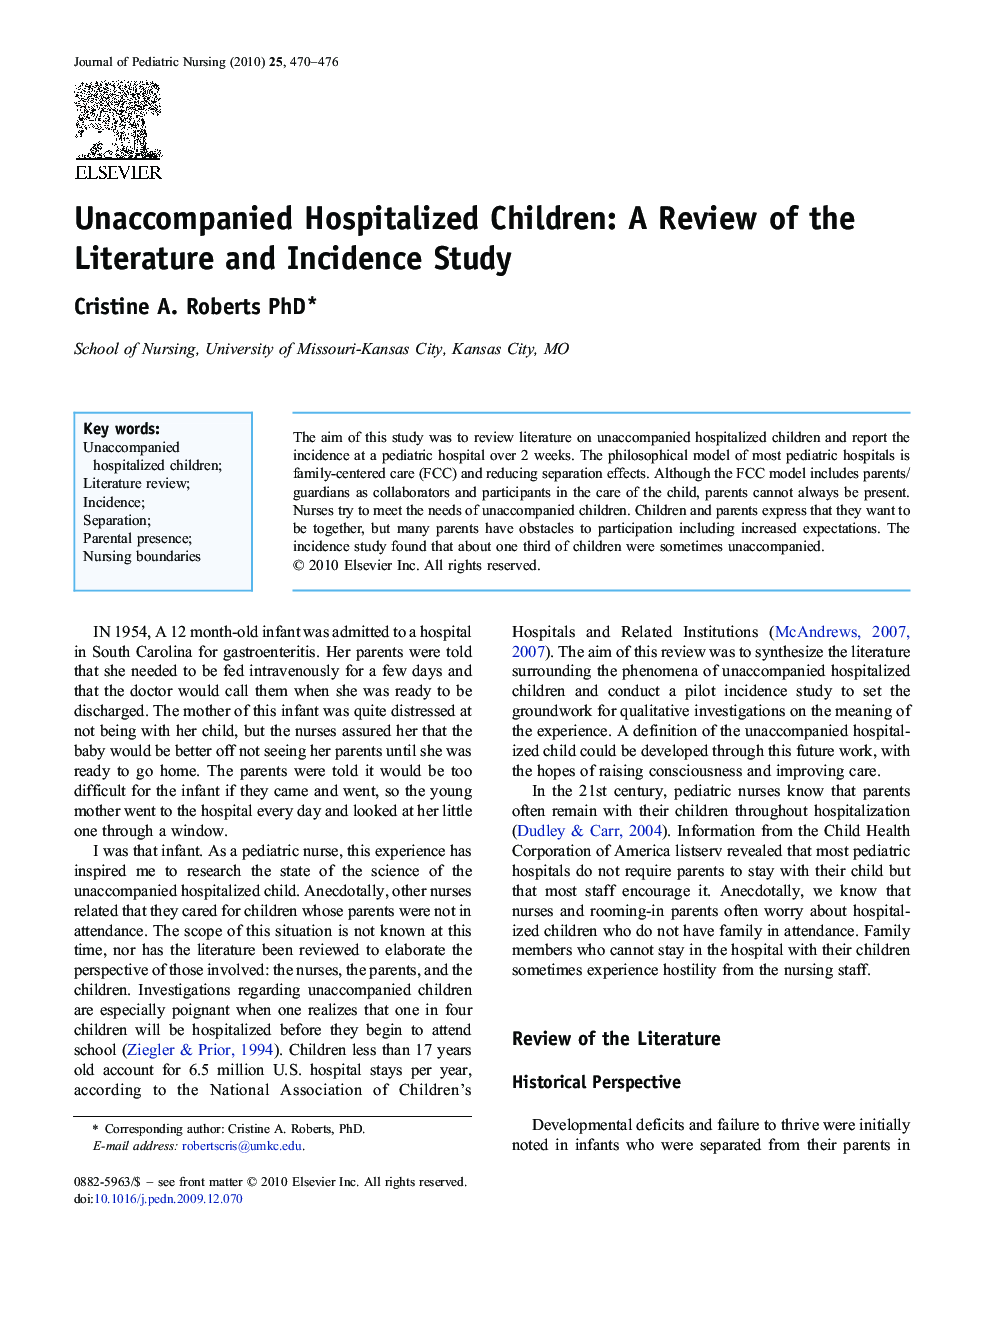 Unaccompanied Hospitalized Children: A Review of the Literature and Incidence Study